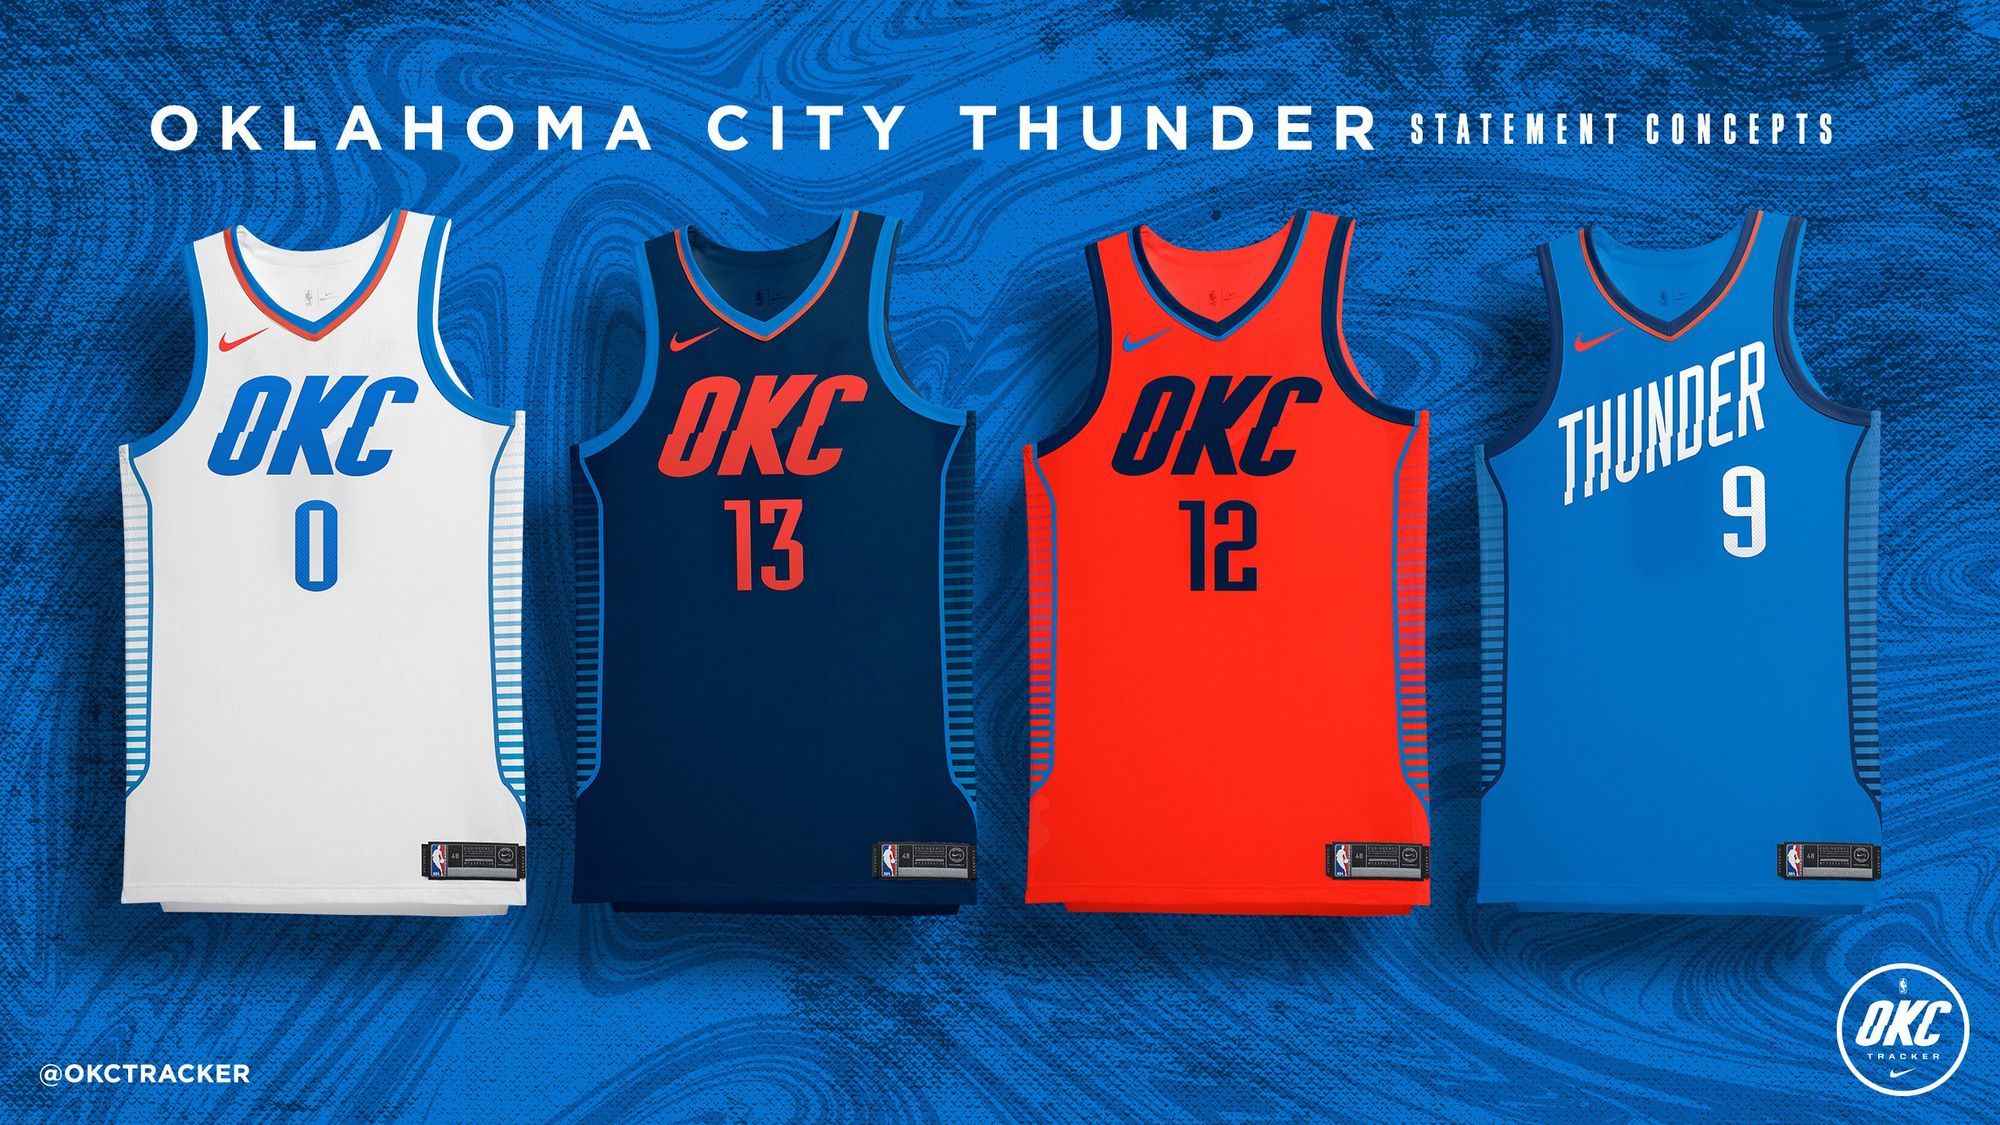 New Thunder uniforms honor Native Americans